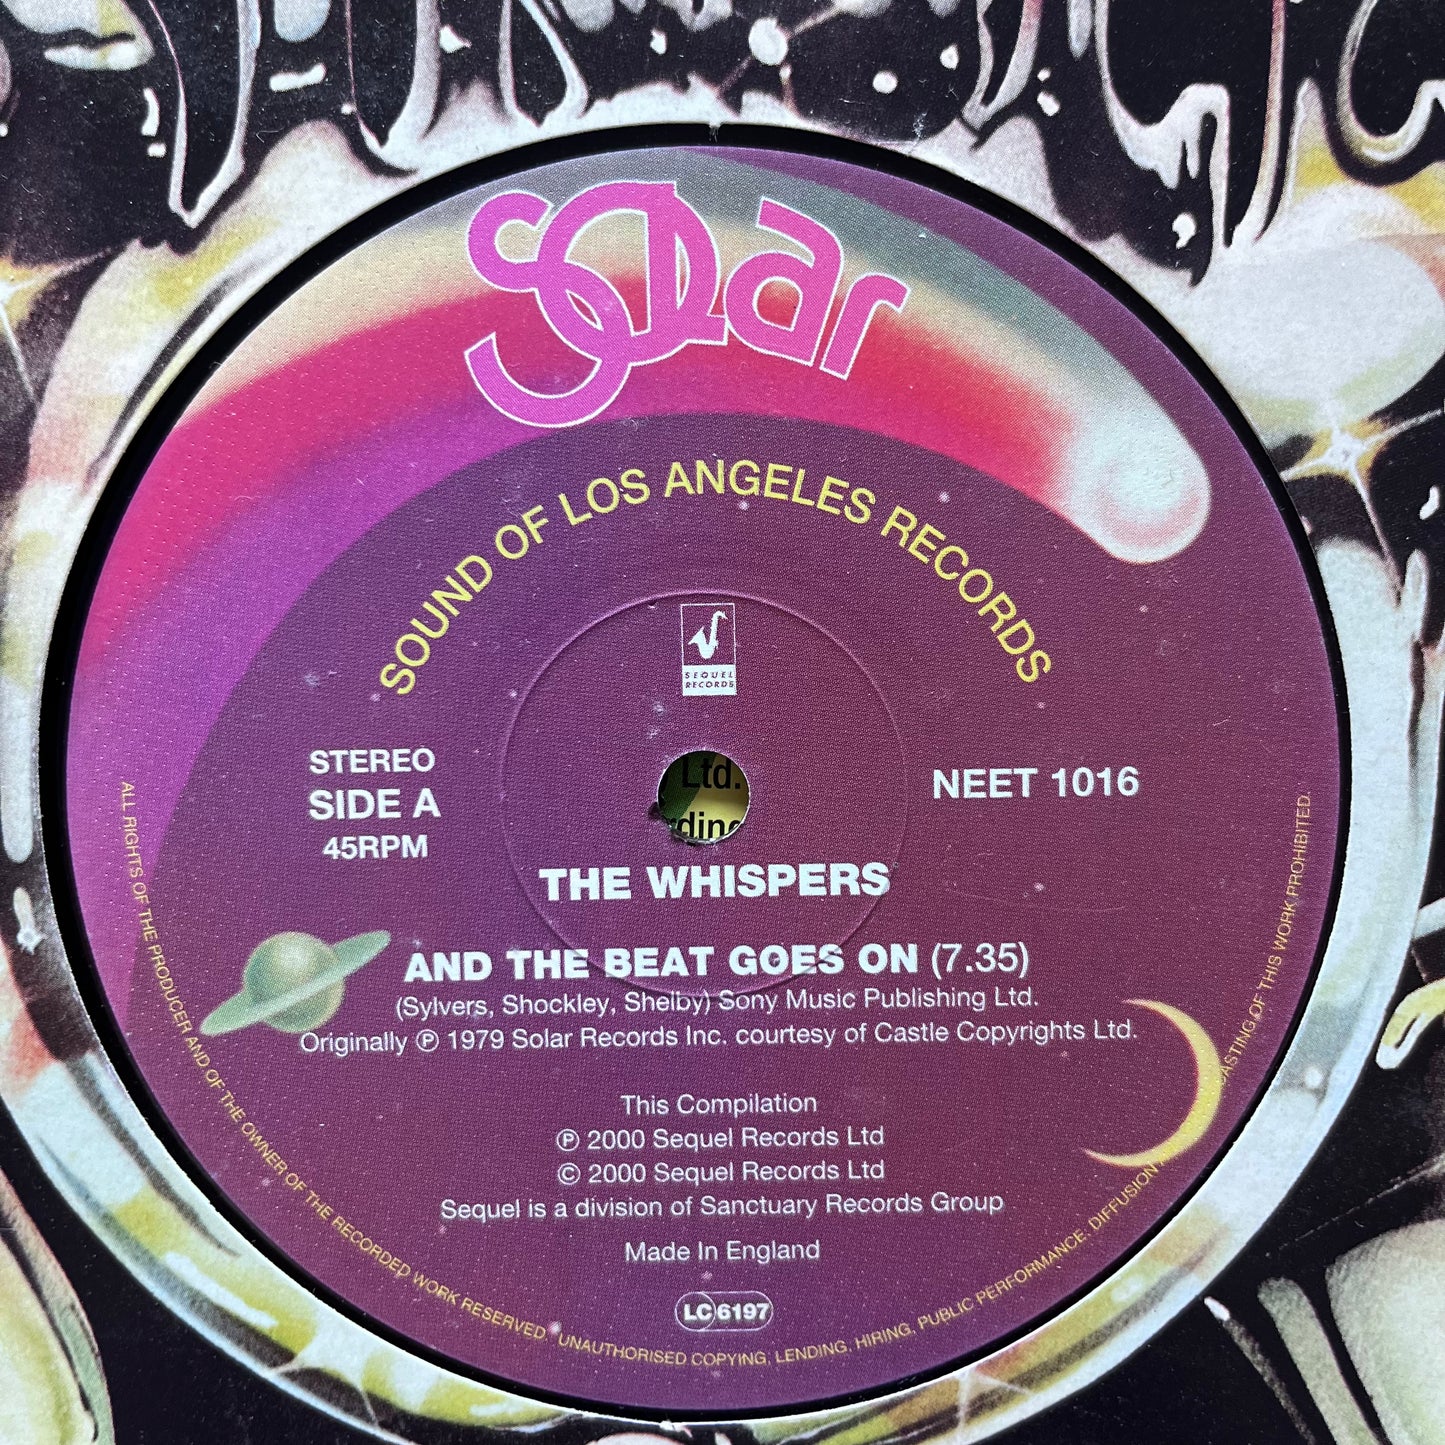 The Whispers “And The Beat Goes On” / “It’s A Love Thing” 2 Track 12inch Vinyl Record